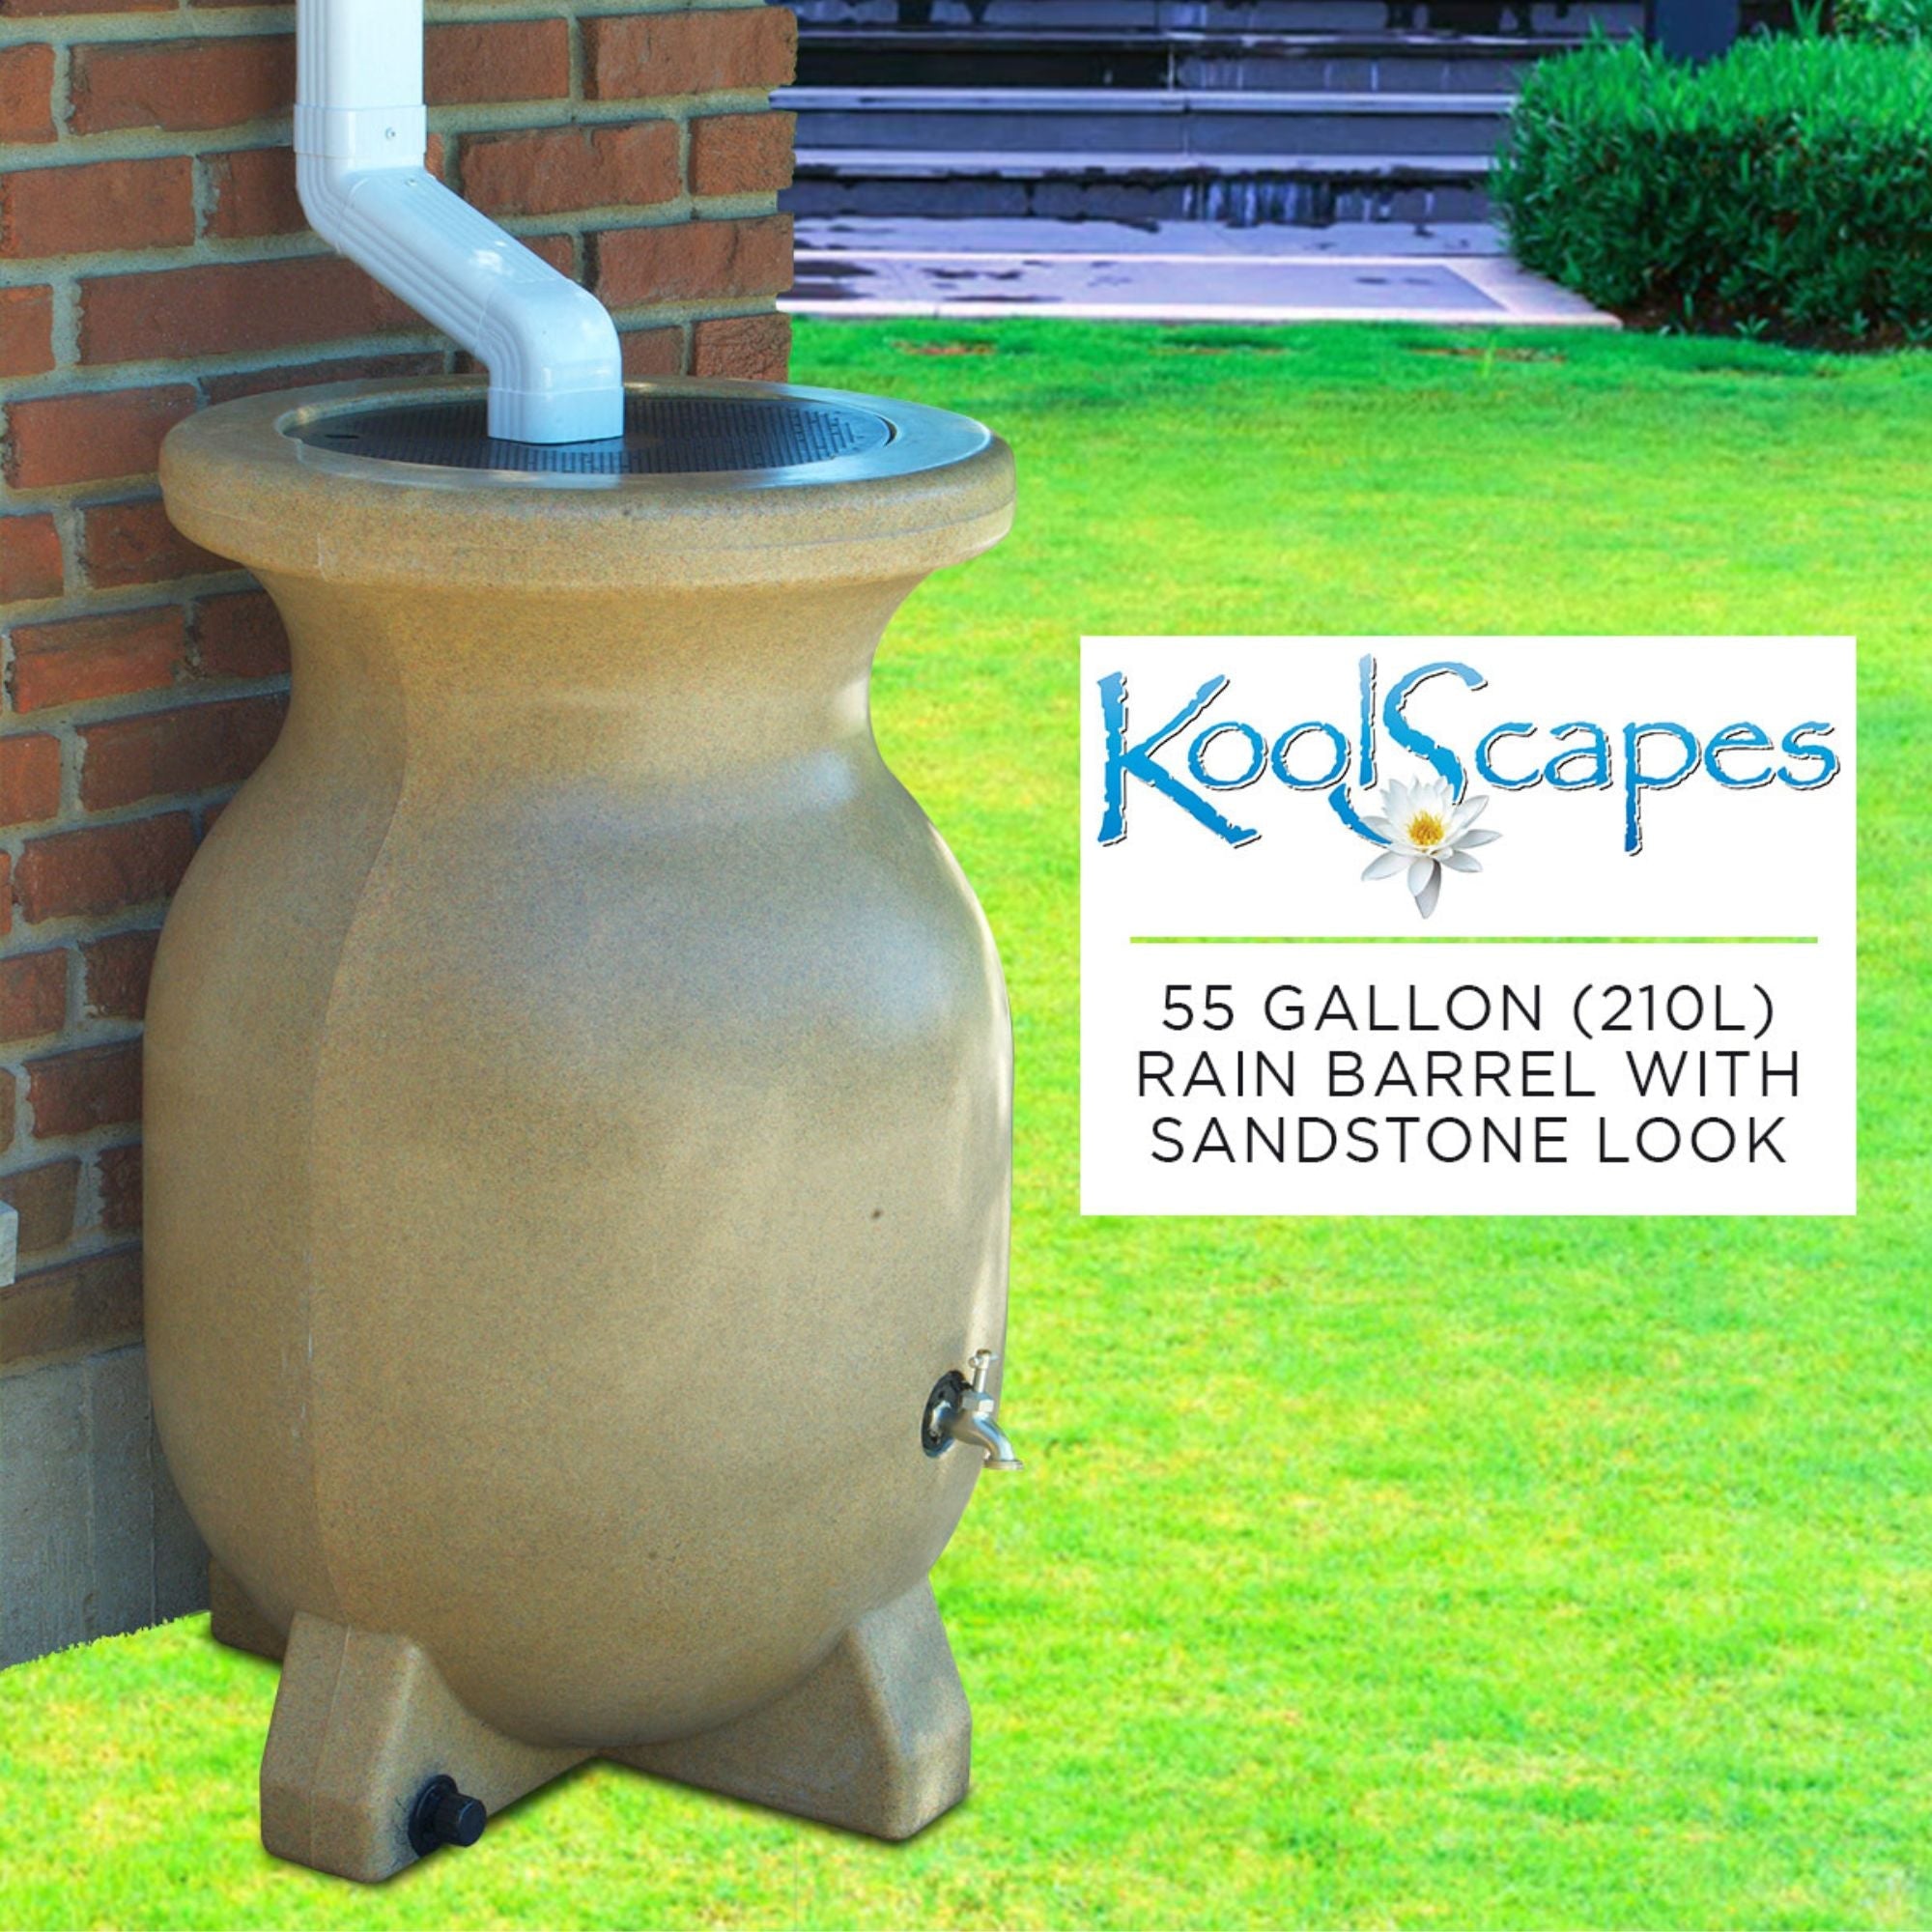 Lifestyle image of rain barrel set up on grass under a white downspout with a red brick wall in the background. Overlay to the right contains the Koolscapes logo and text reading, "55 gallon (210L) rain barrel with sandstone look"